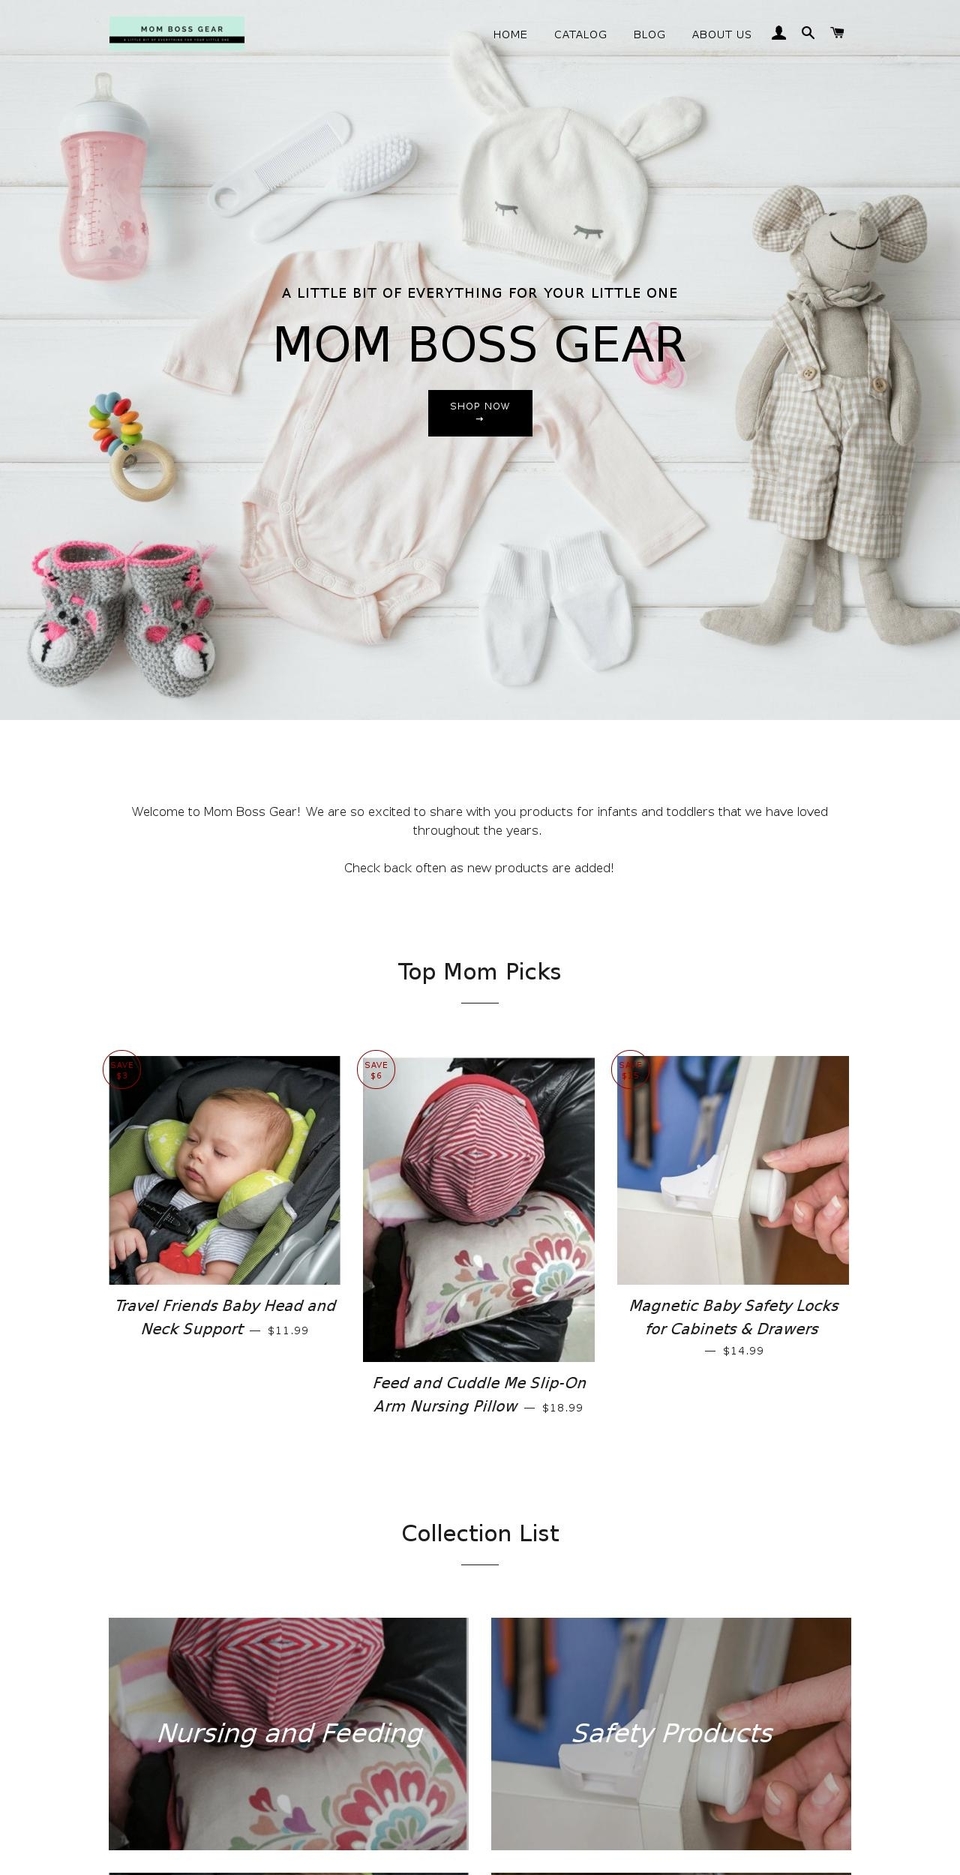 QUEEN Shopify theme site example mombossgear.com